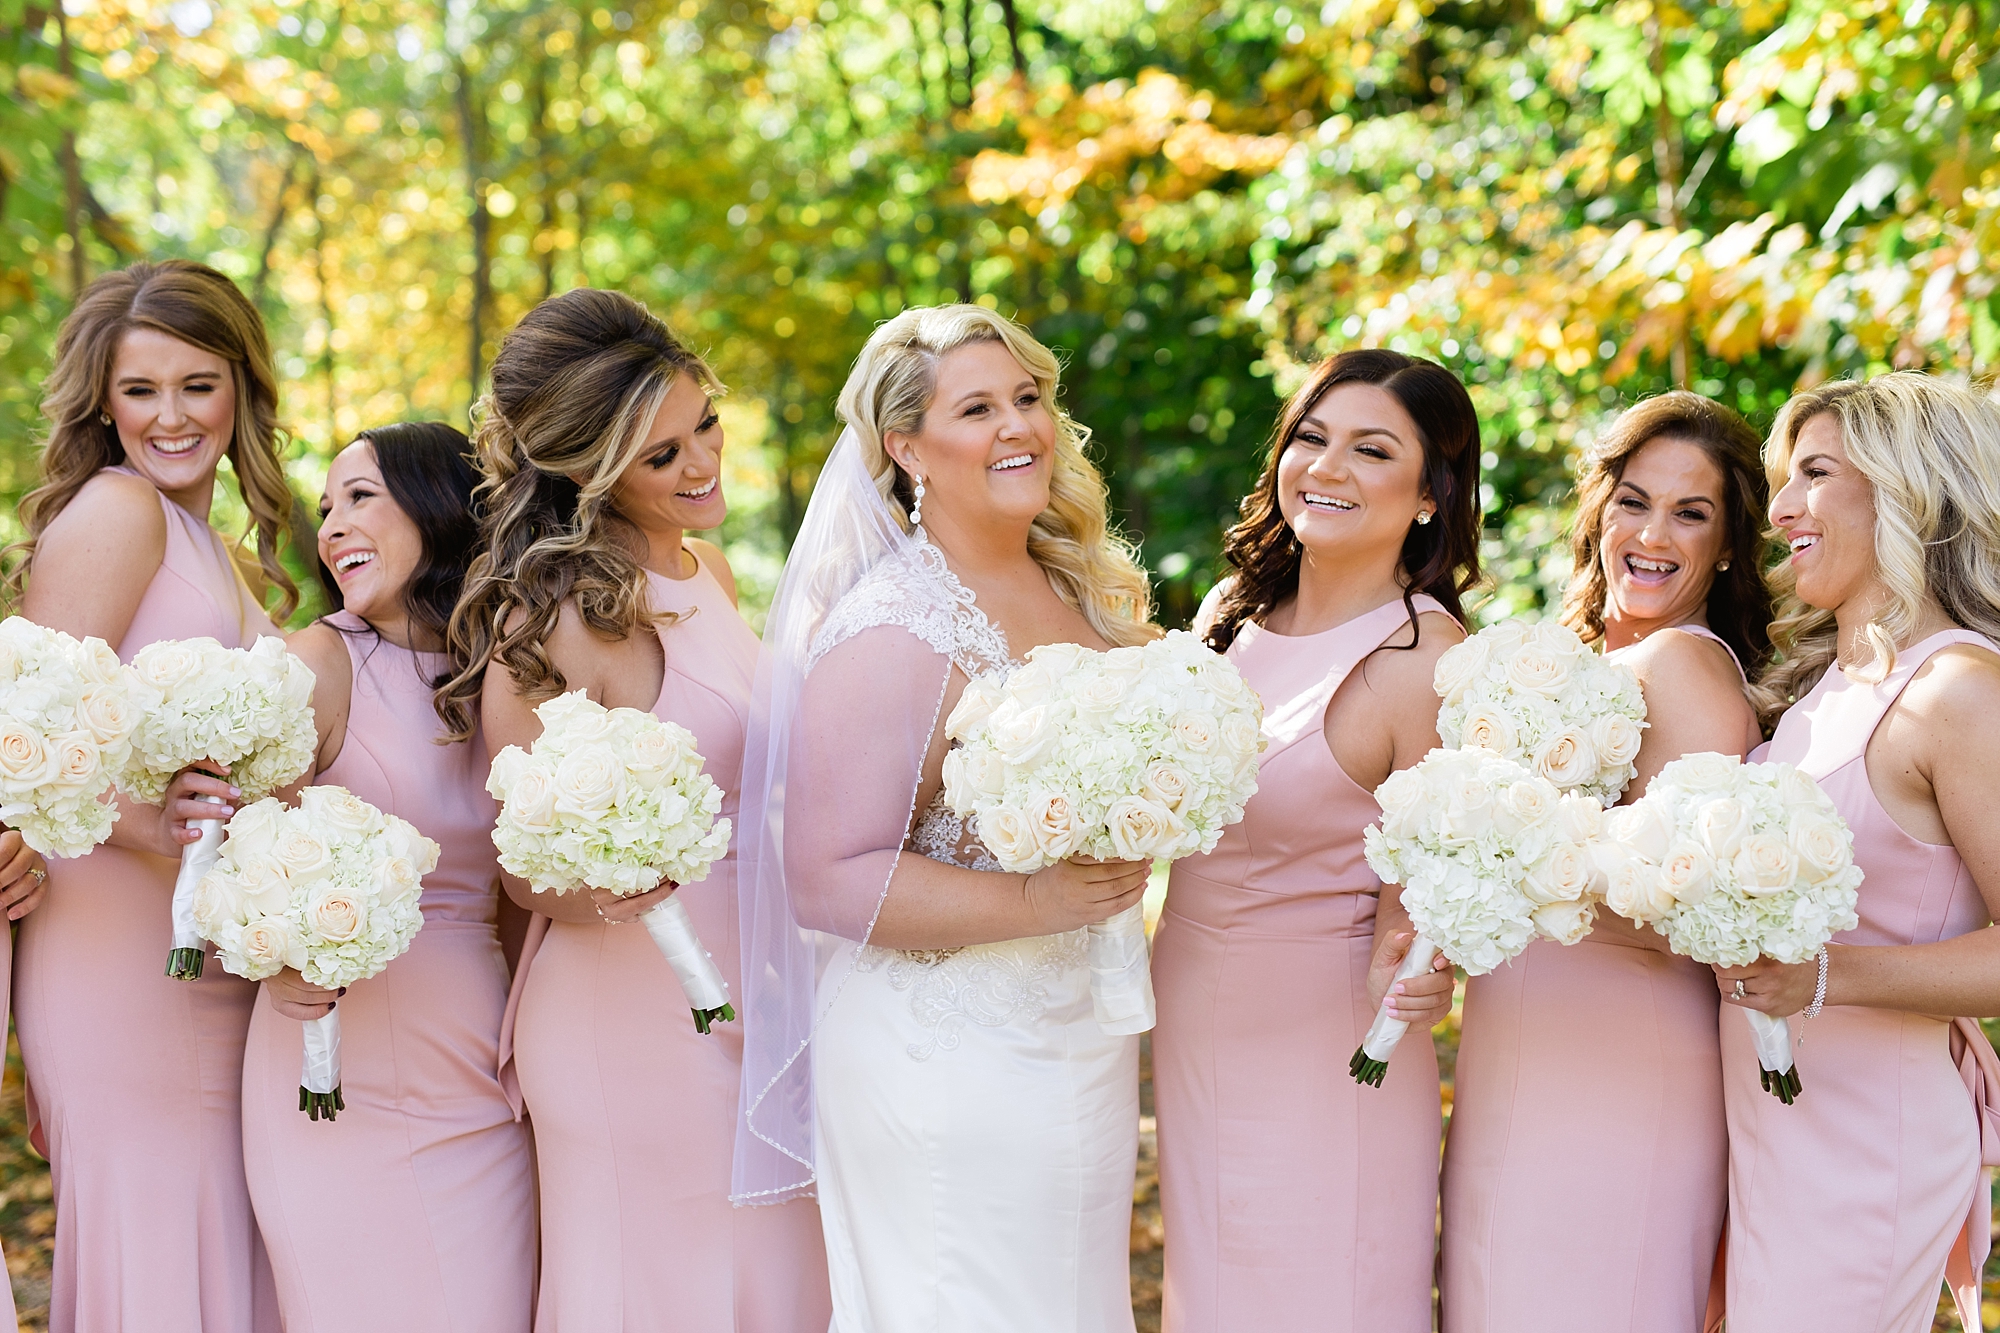 An elegant blush and gold wedding in early October with colorful fall leaves in Metro Detroit, Michigan by Breanne Rochelle Photography.